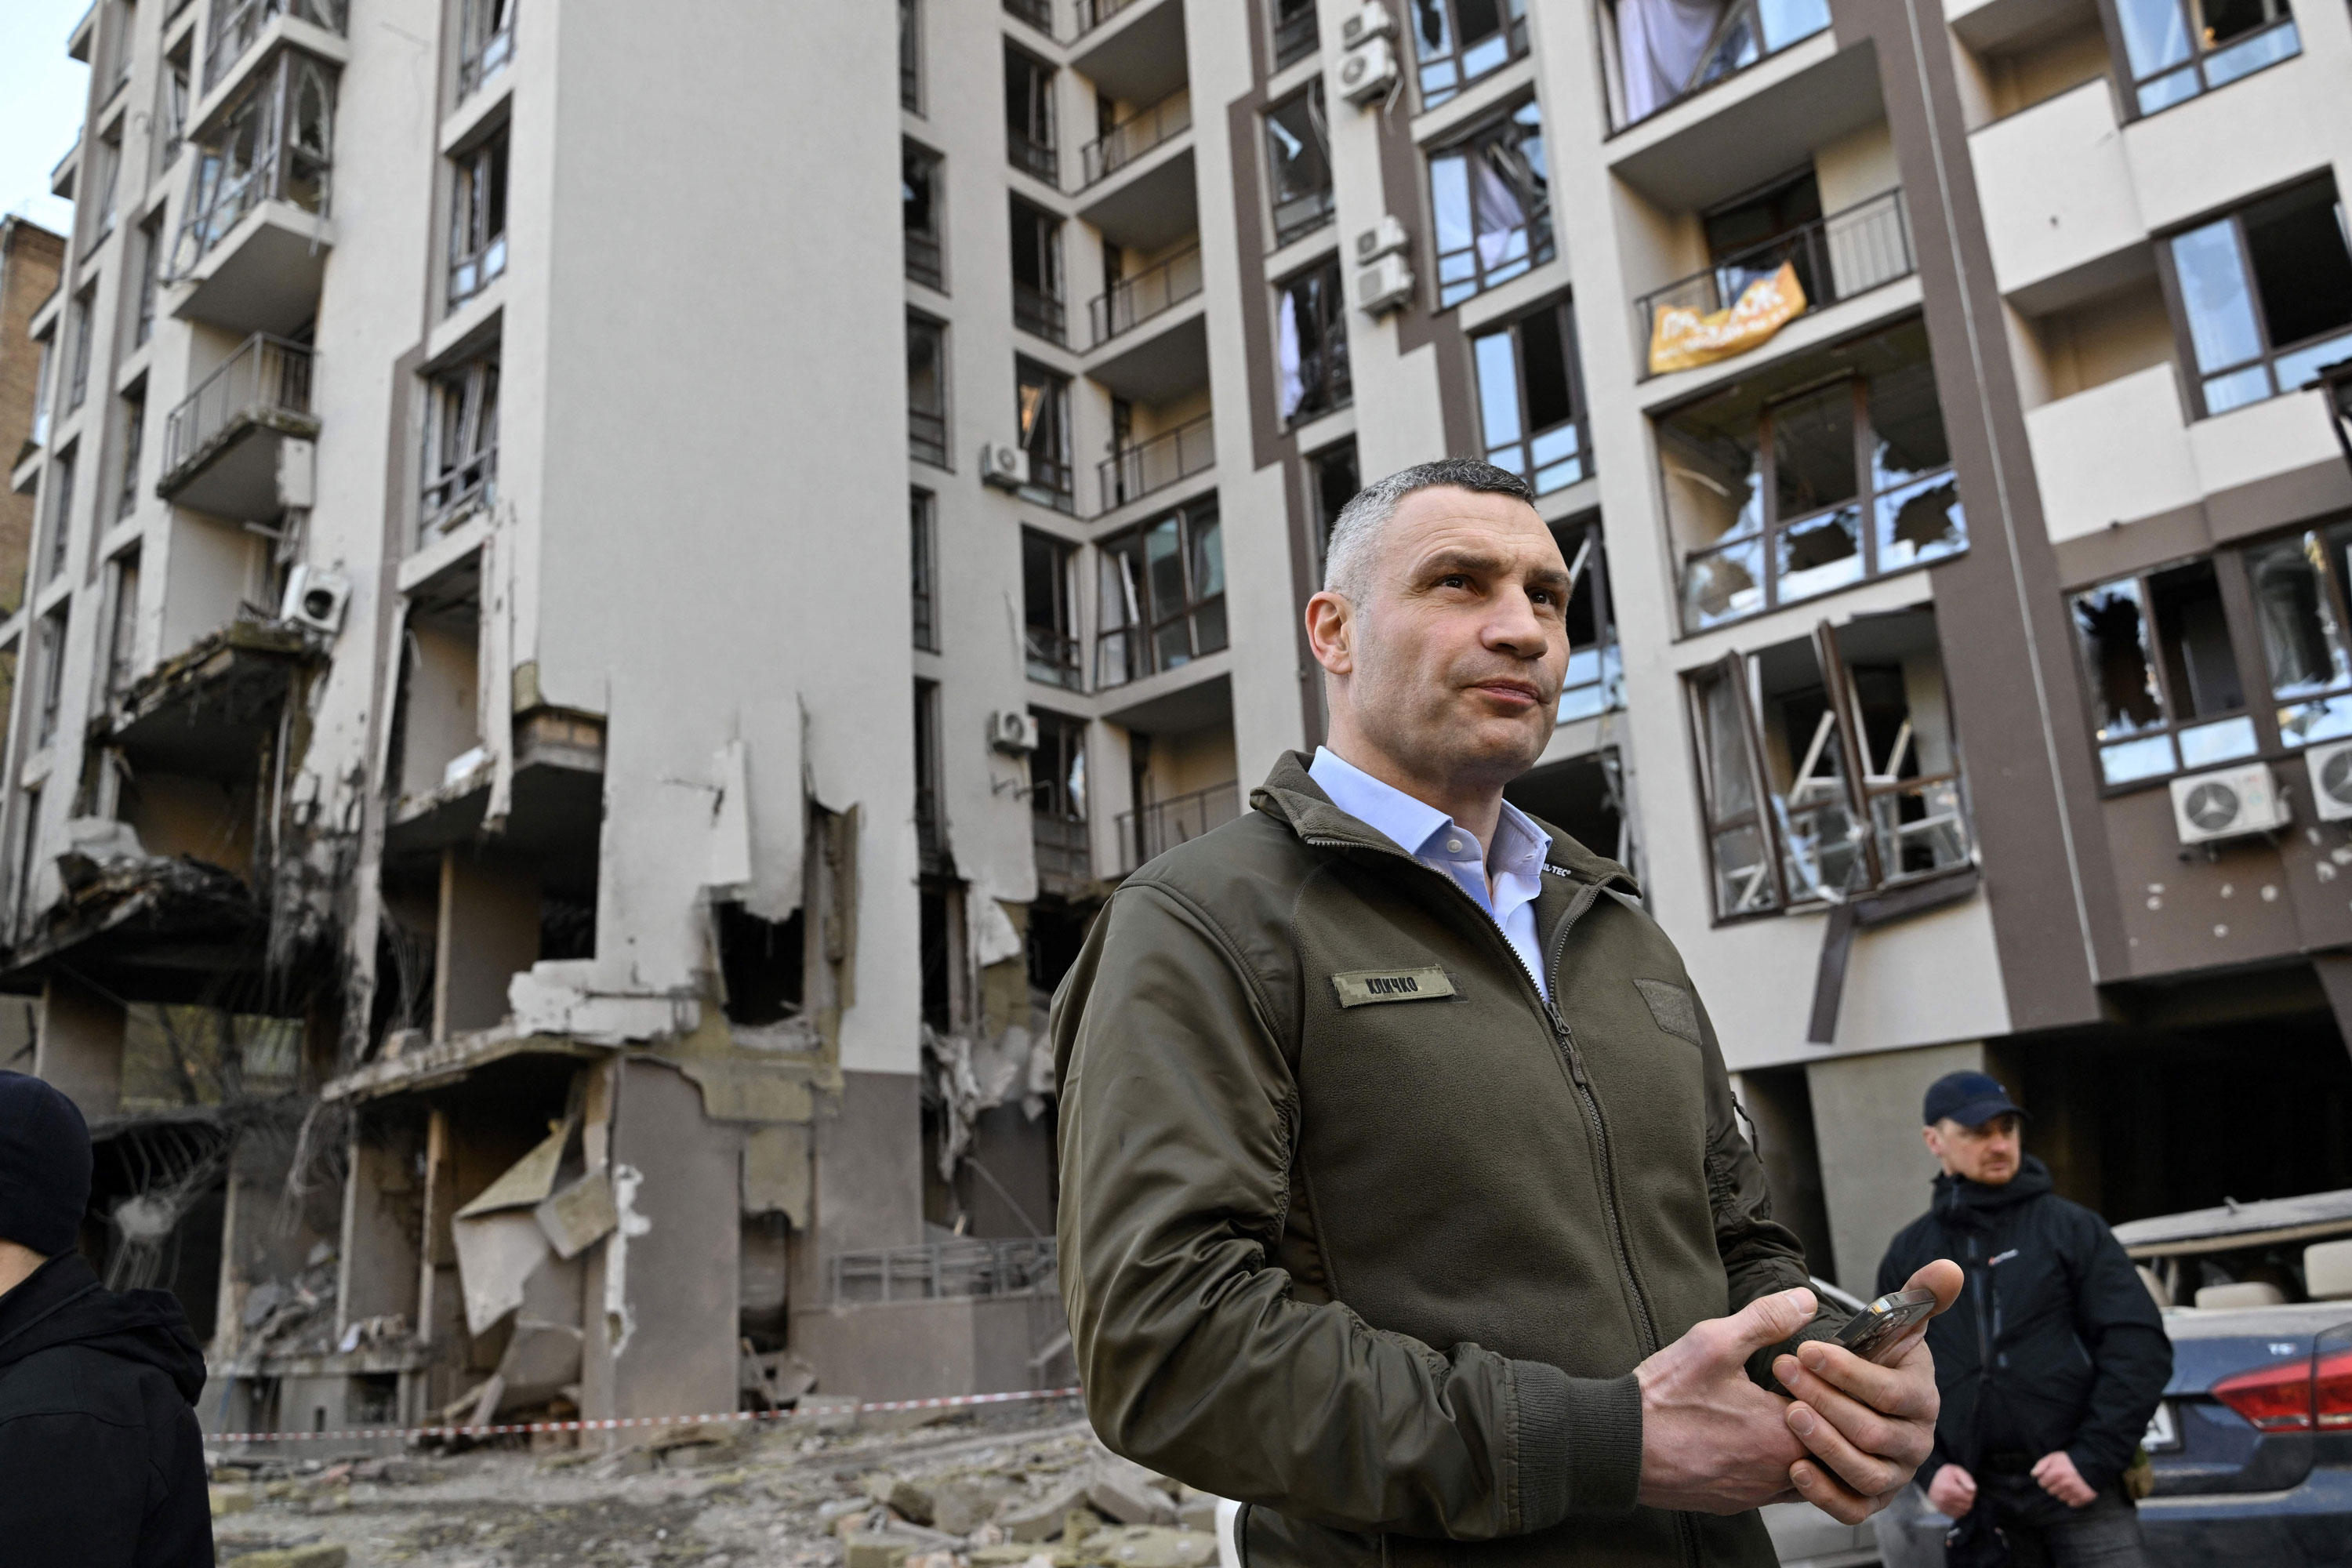 Vitali Klitschko, mayor of Kyiv, stands in front of a damaged building following Russian strikes in Kyiv on April 29